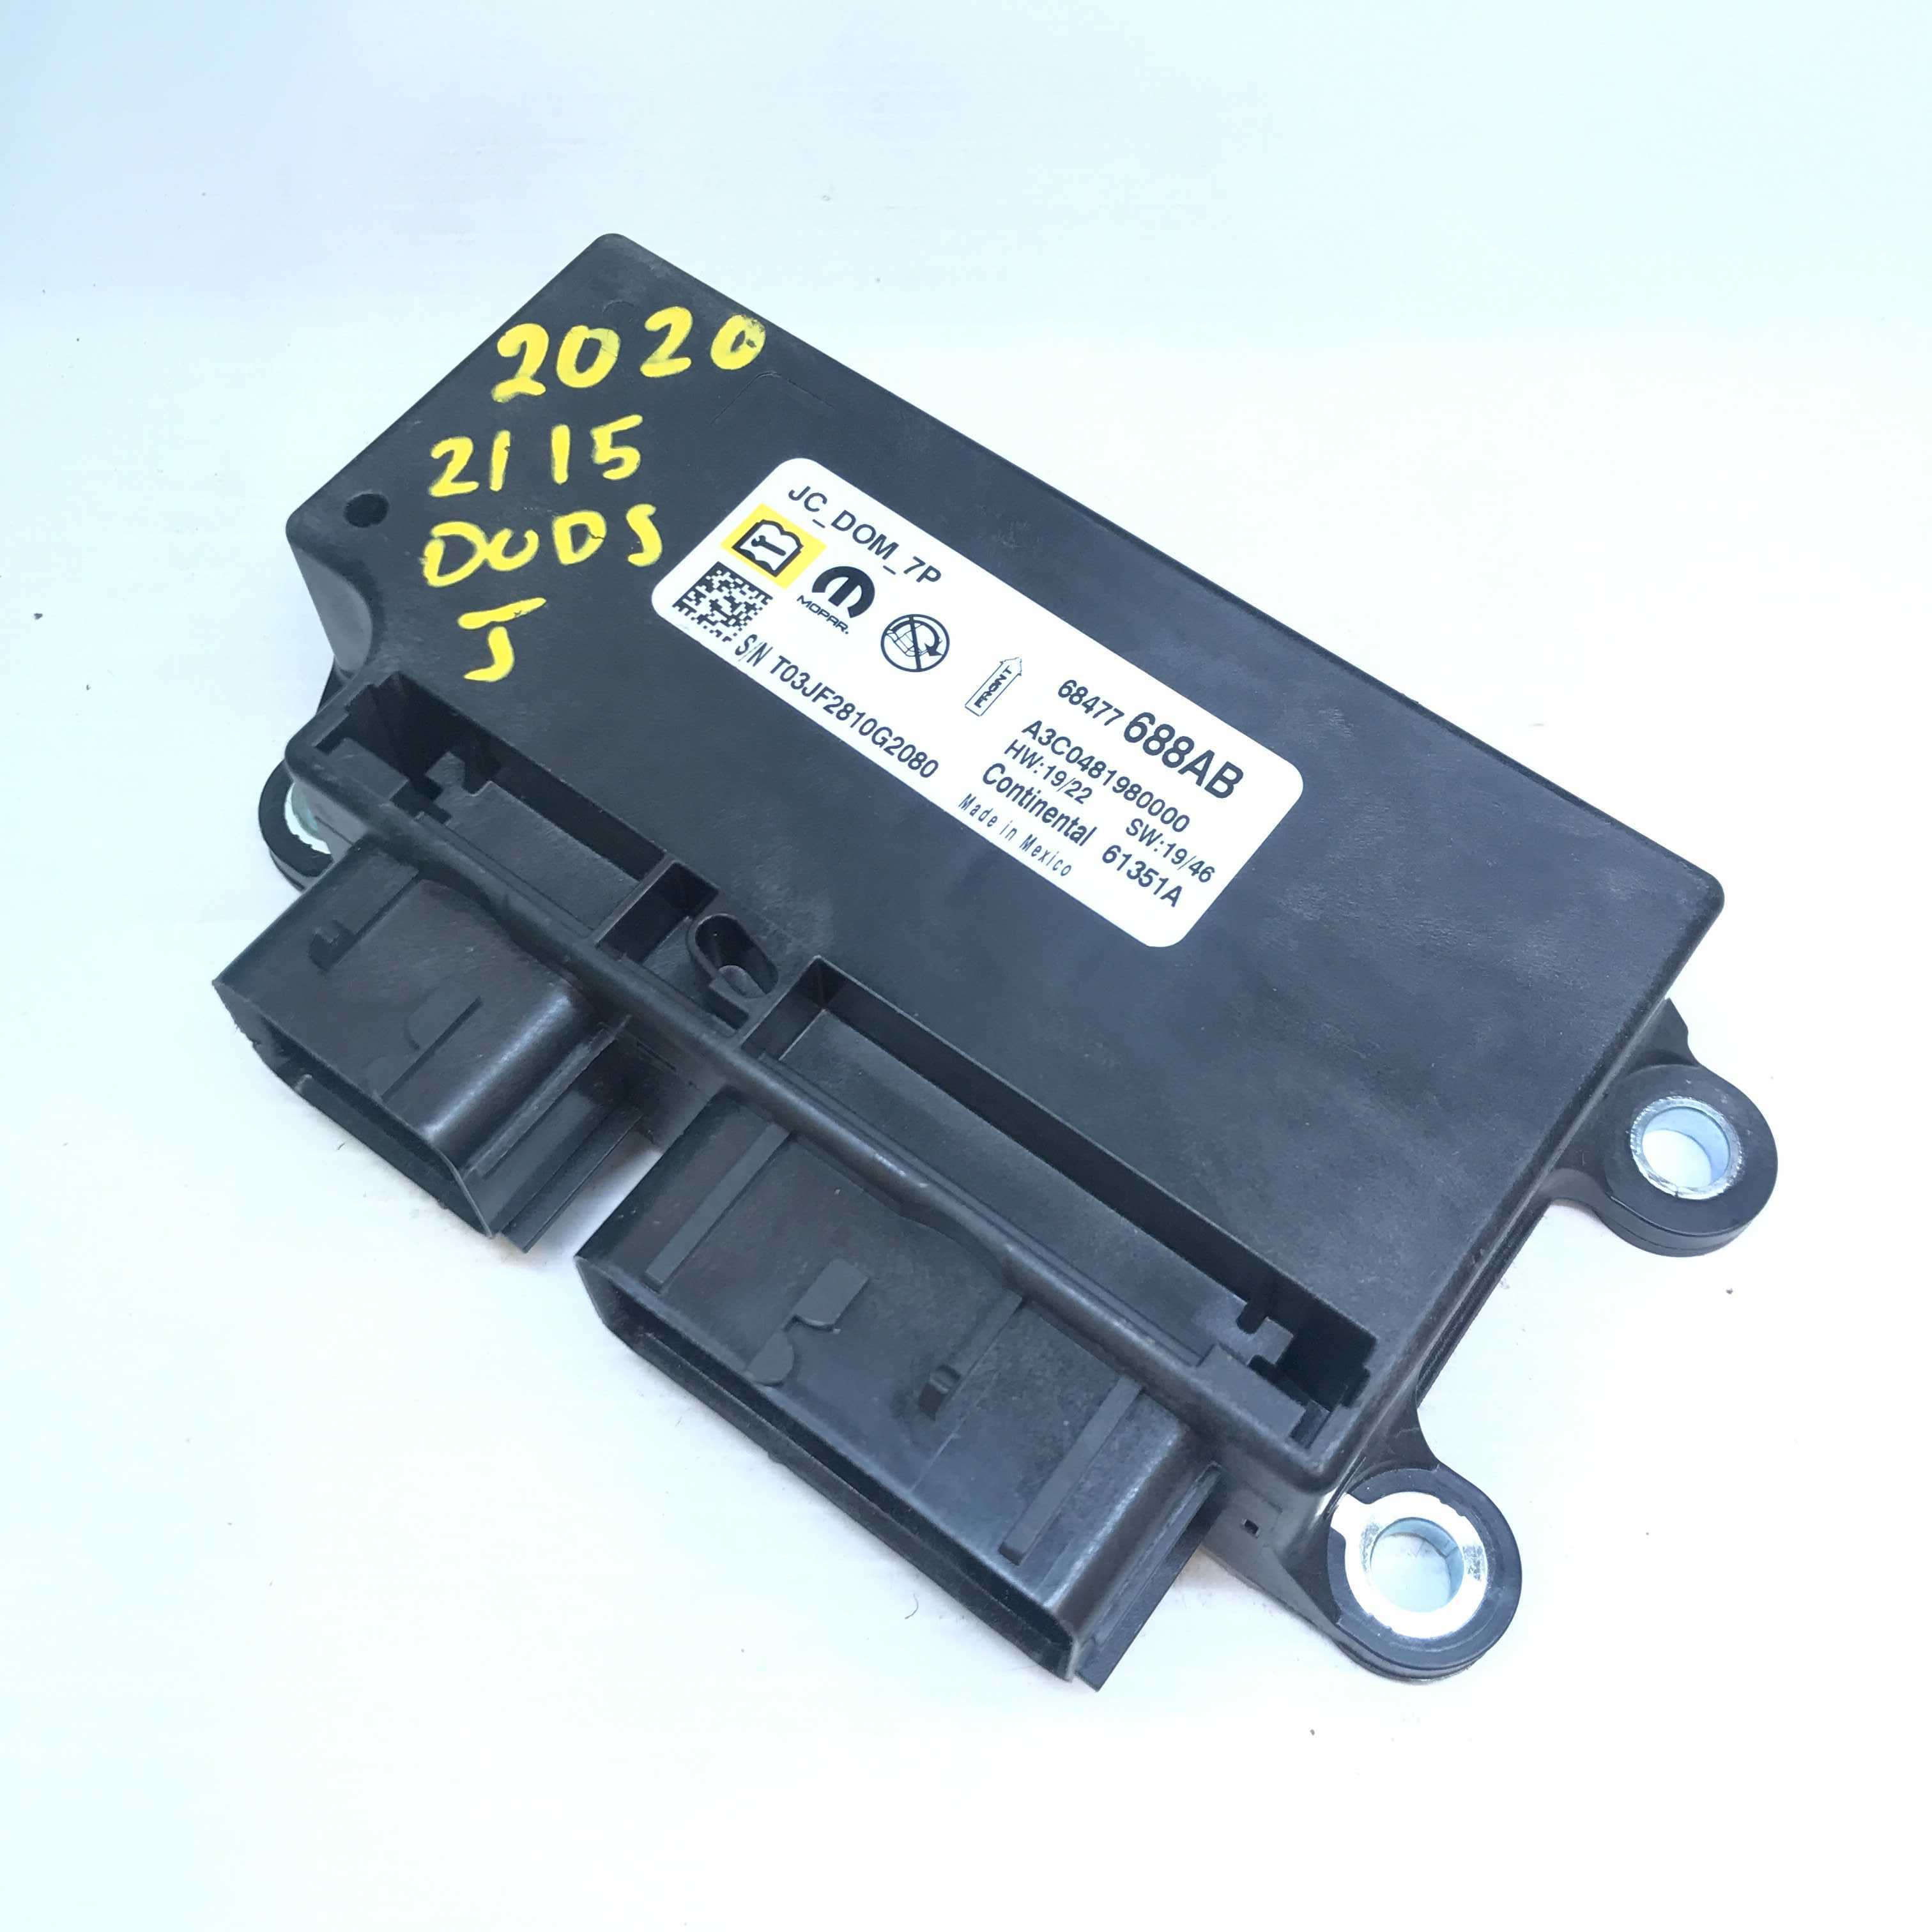 JEEP WRANGLER SRS ORC ORM Occupant Control Module - Airbag Computer Control  Module PART #68477688AB Airbag Modules In Stock | MyAirbags